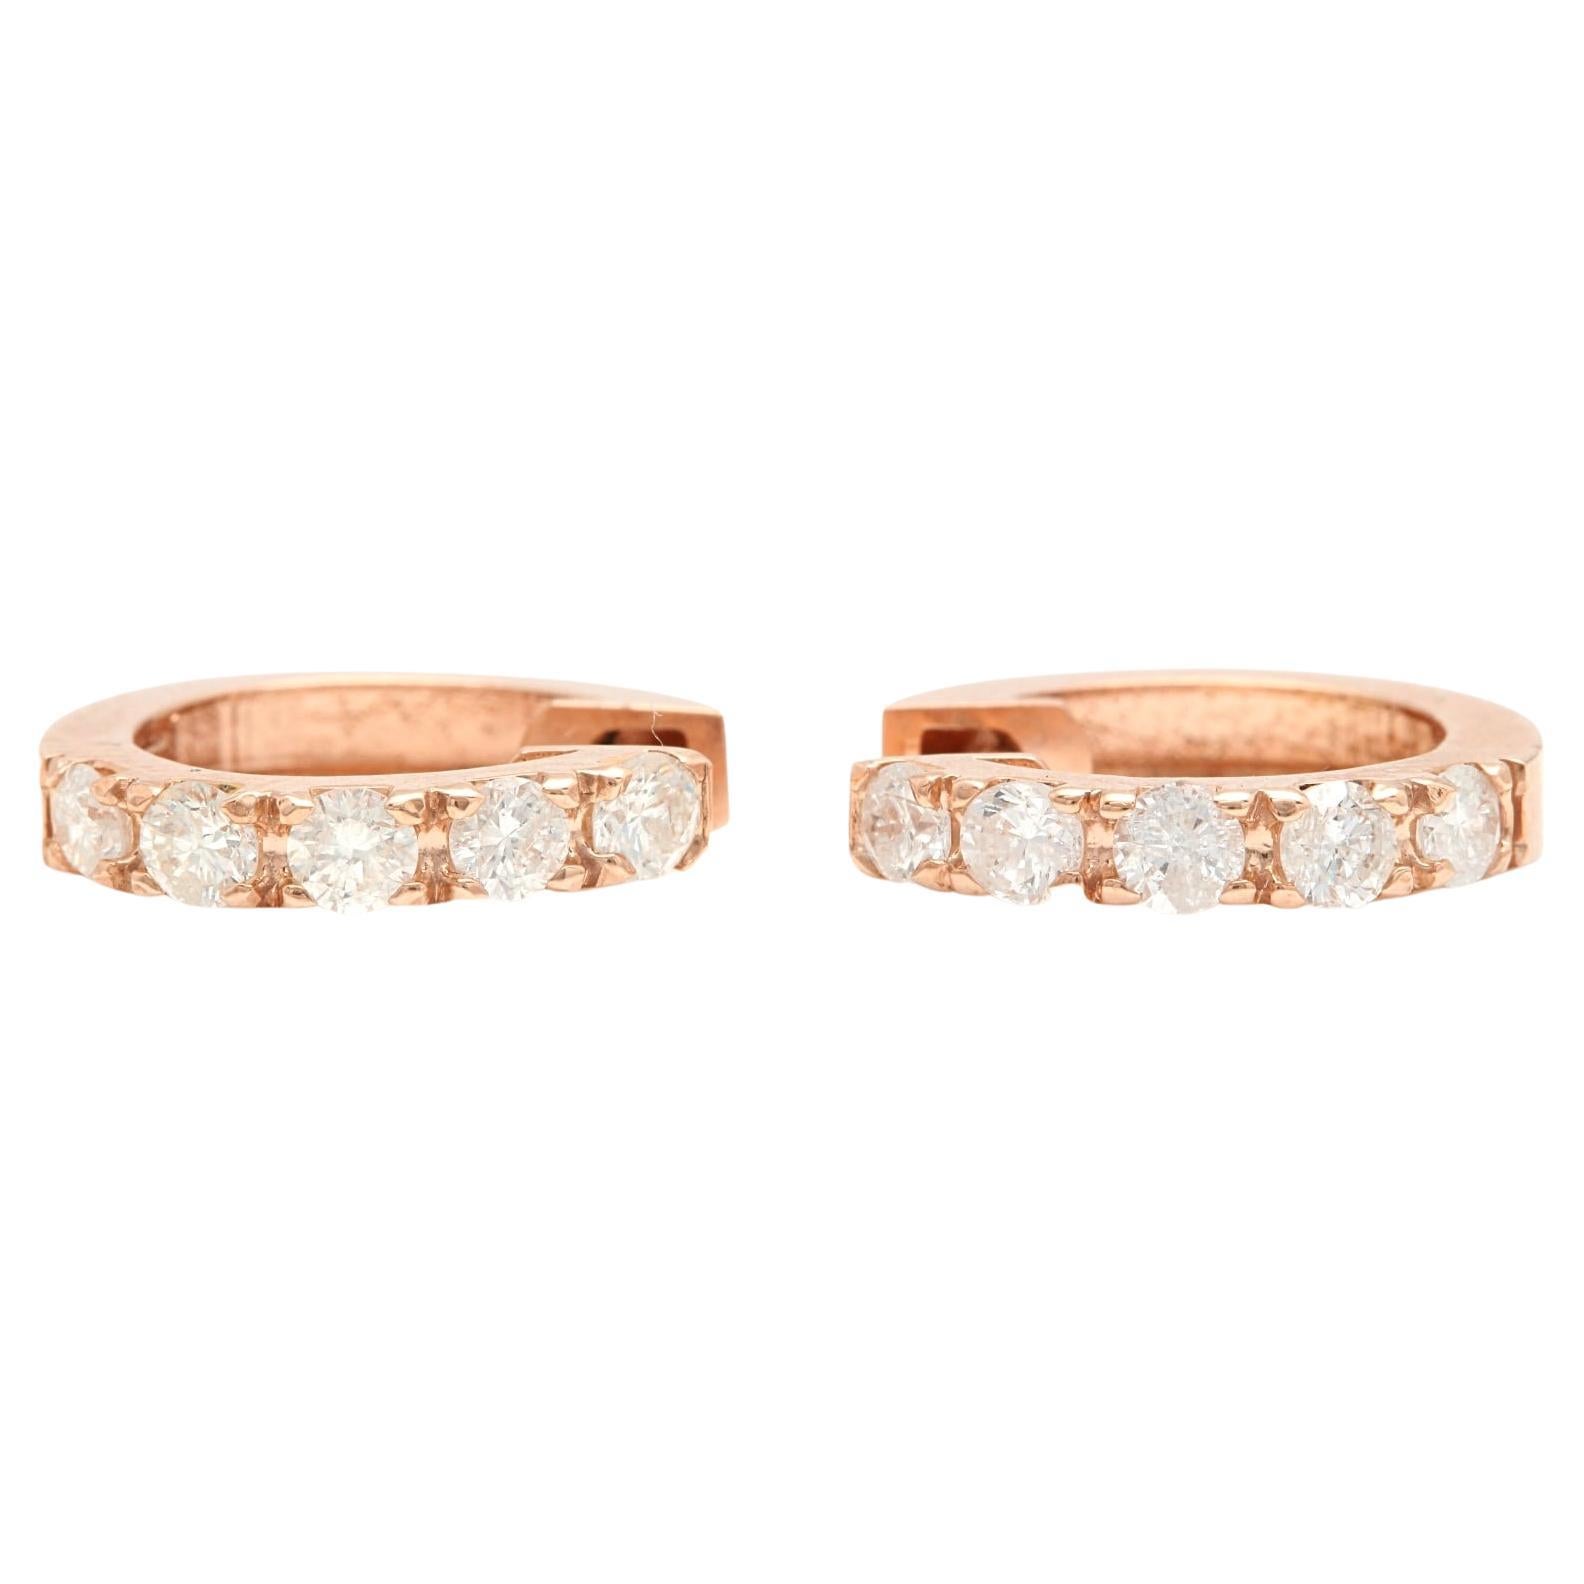 Exquisite 0.70 Carats Natural Diamond 14K Solid Rose Gold Hoop Earrings